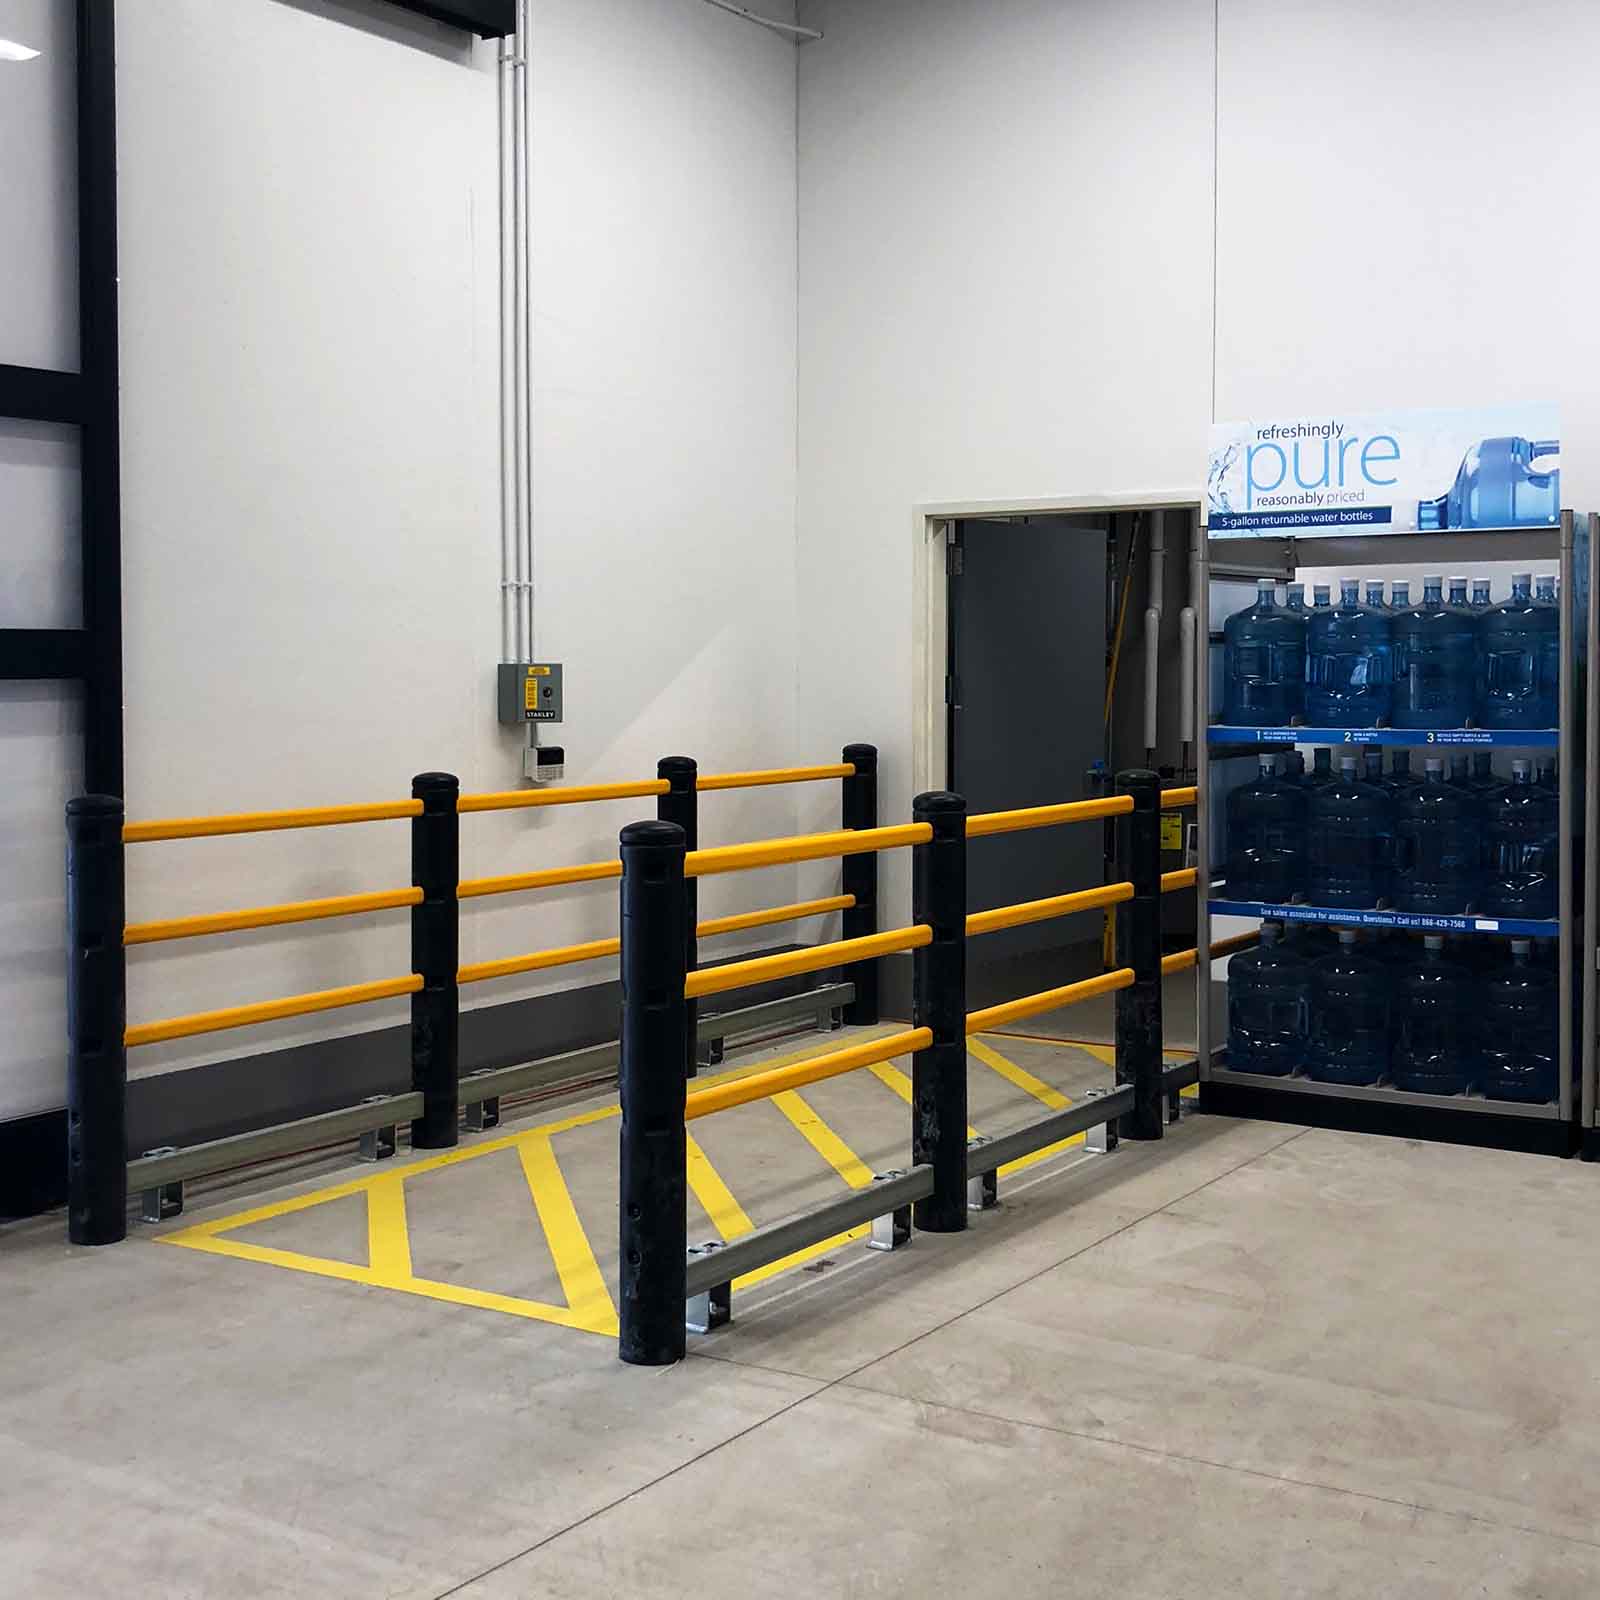 McCue Pedestrian Barrier Safety Protection in Warehouse